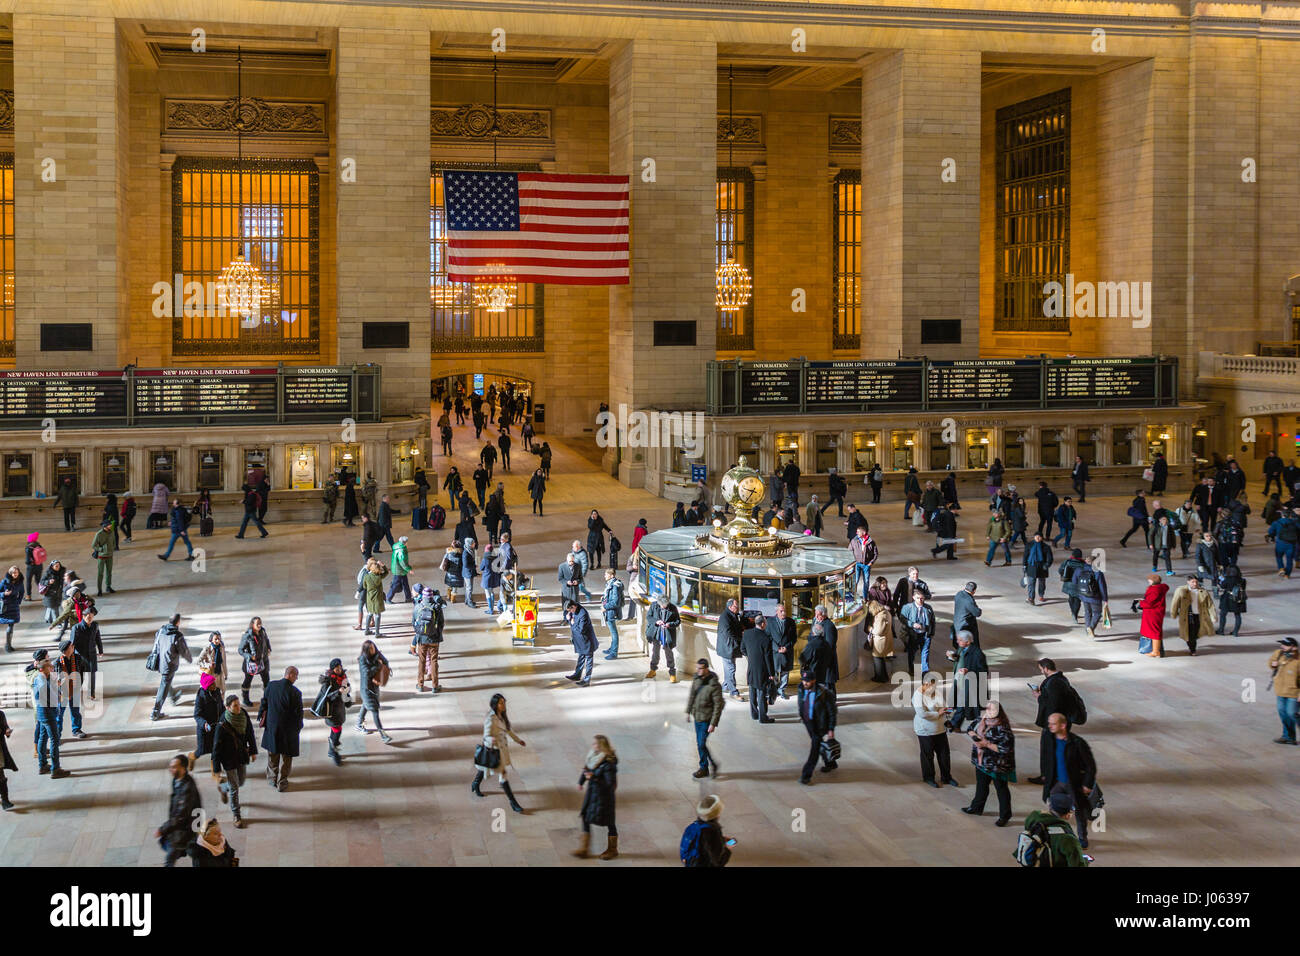 Crowds in the main concourse, Grand Central Station, New York Stock Photo